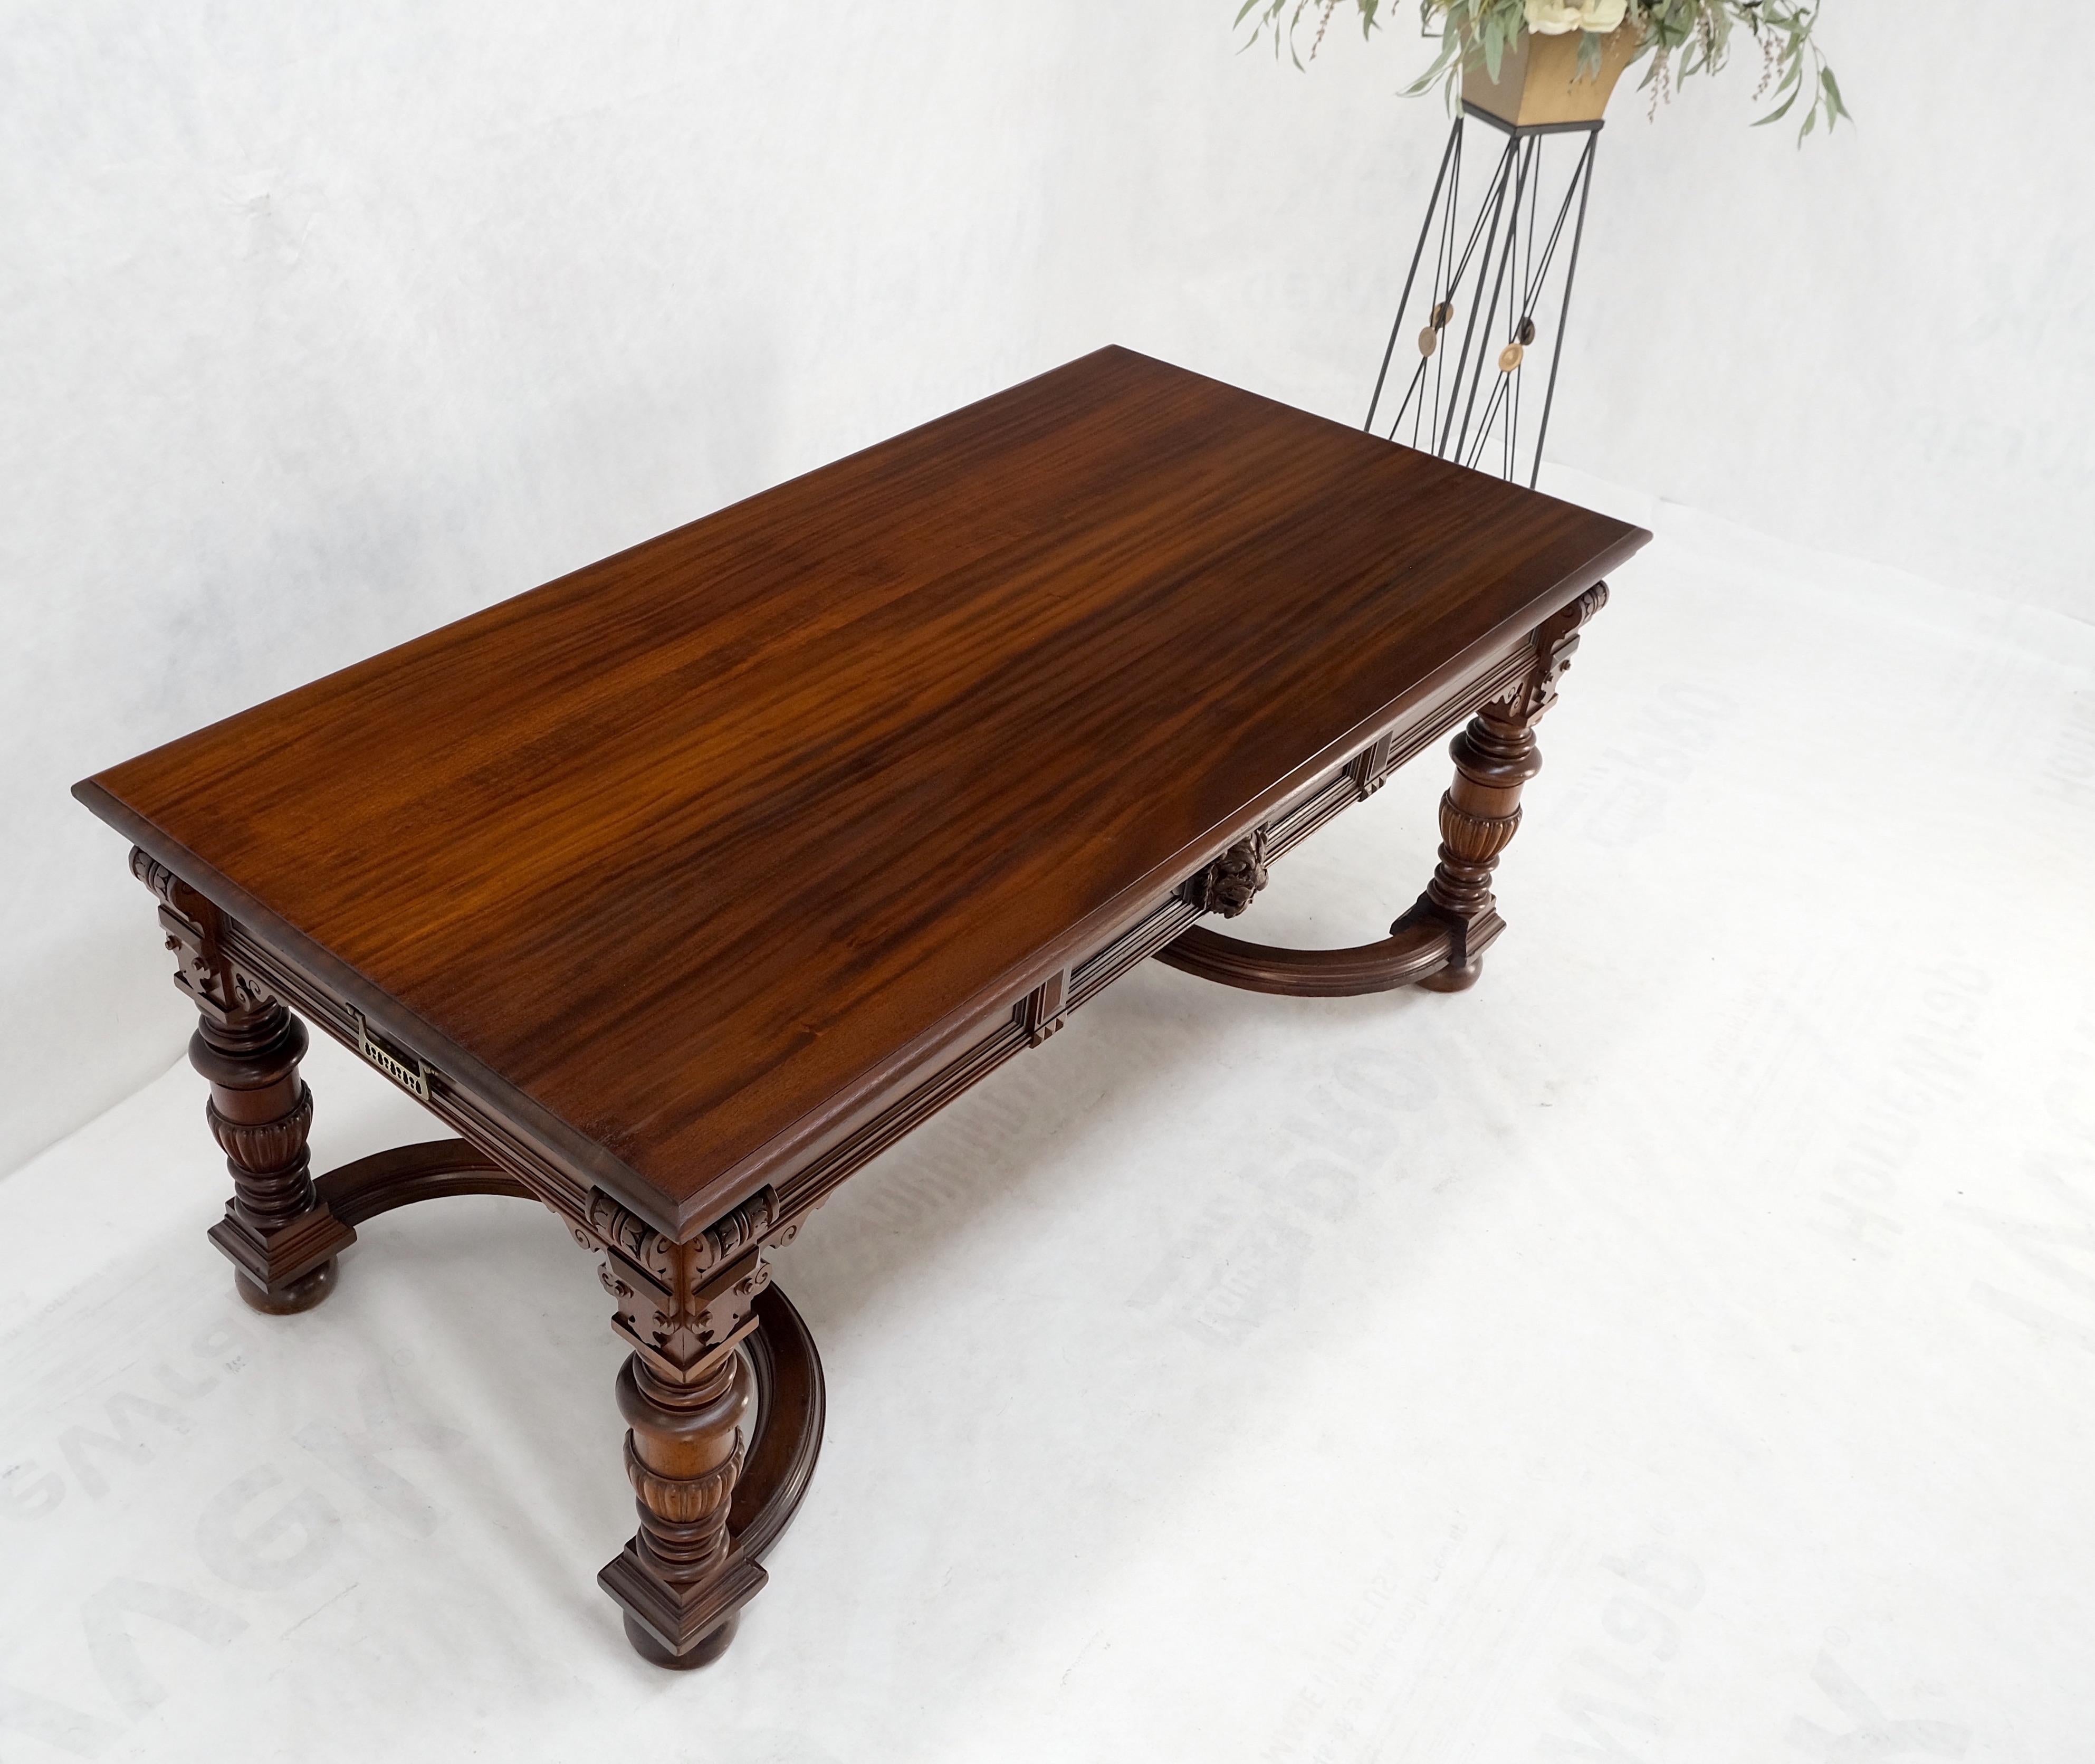 American Large Heavily Carved Mahogany 4 Drawers Library Writing Walnut Table Desk Mint!